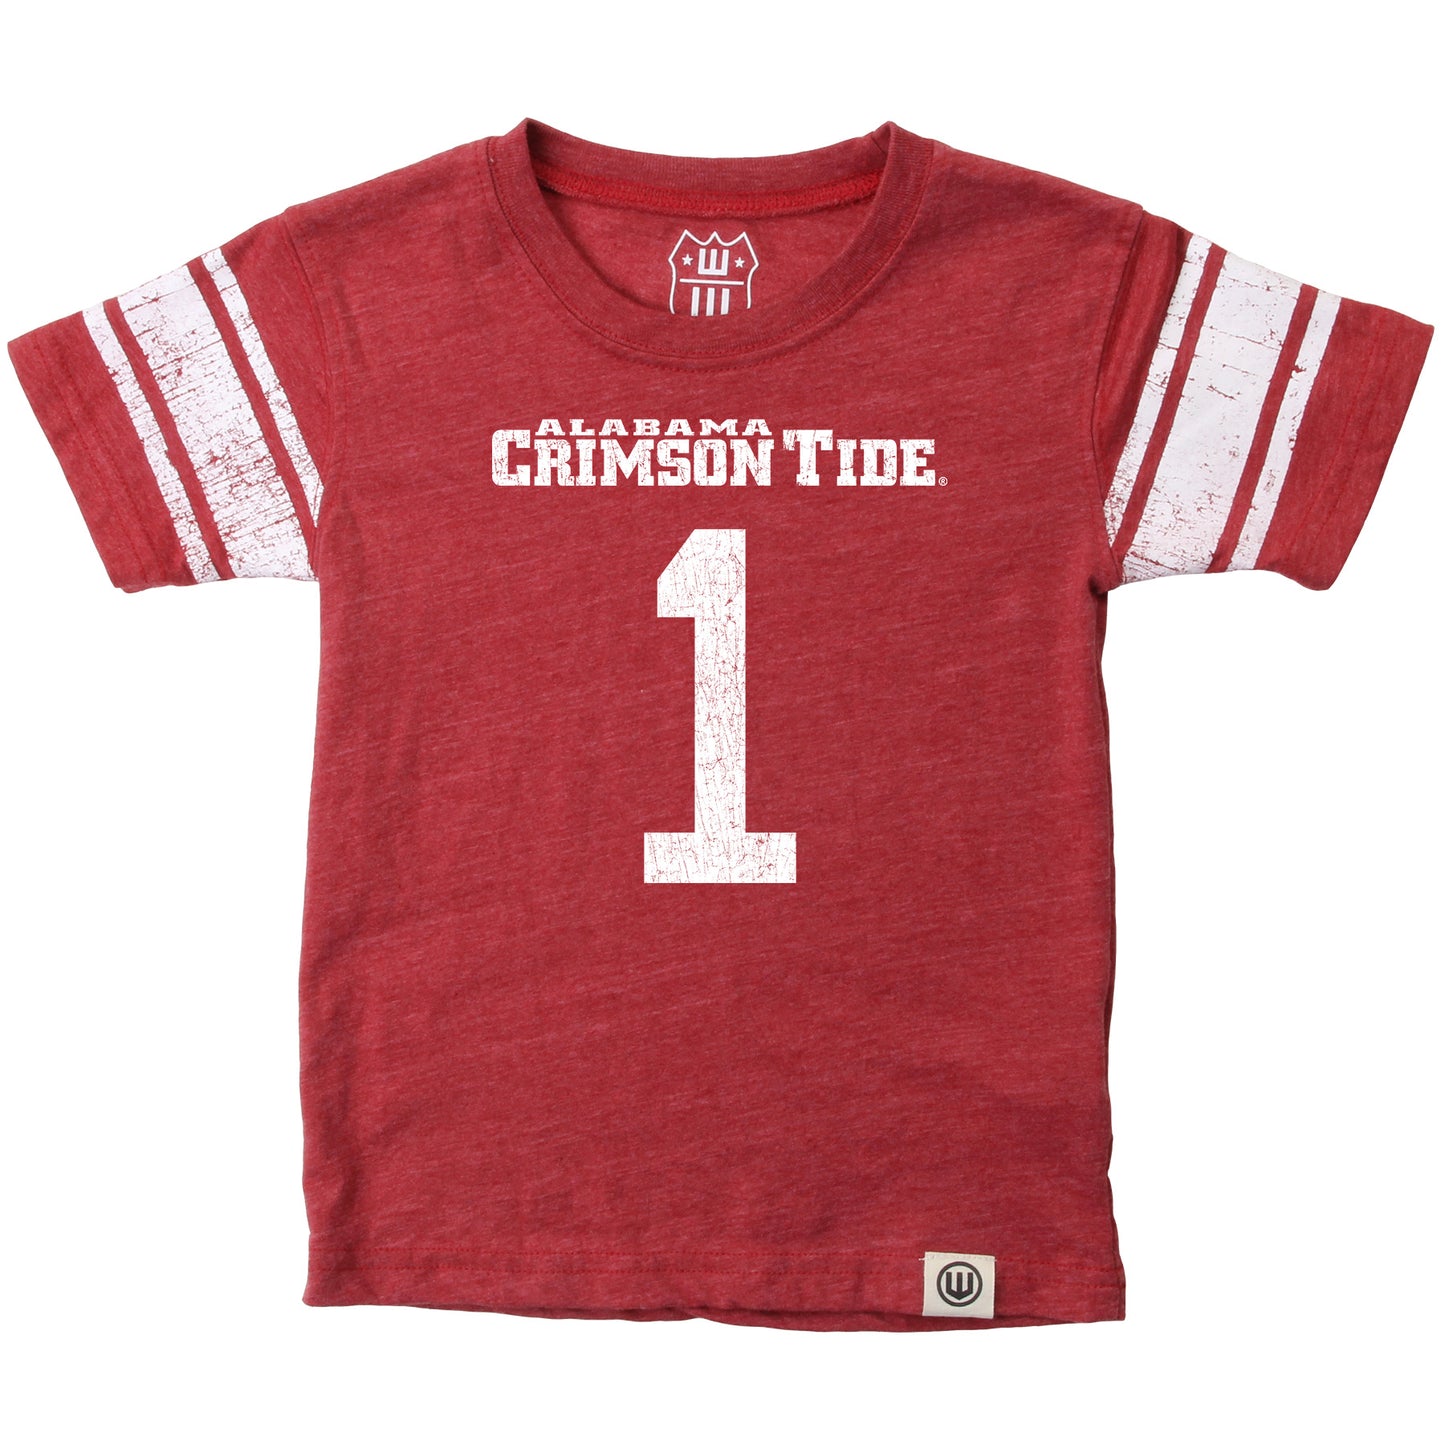 Alabama Crimson Tide Wes and Willy Youth Boys College Short Sleeve Jersey T-Shirt